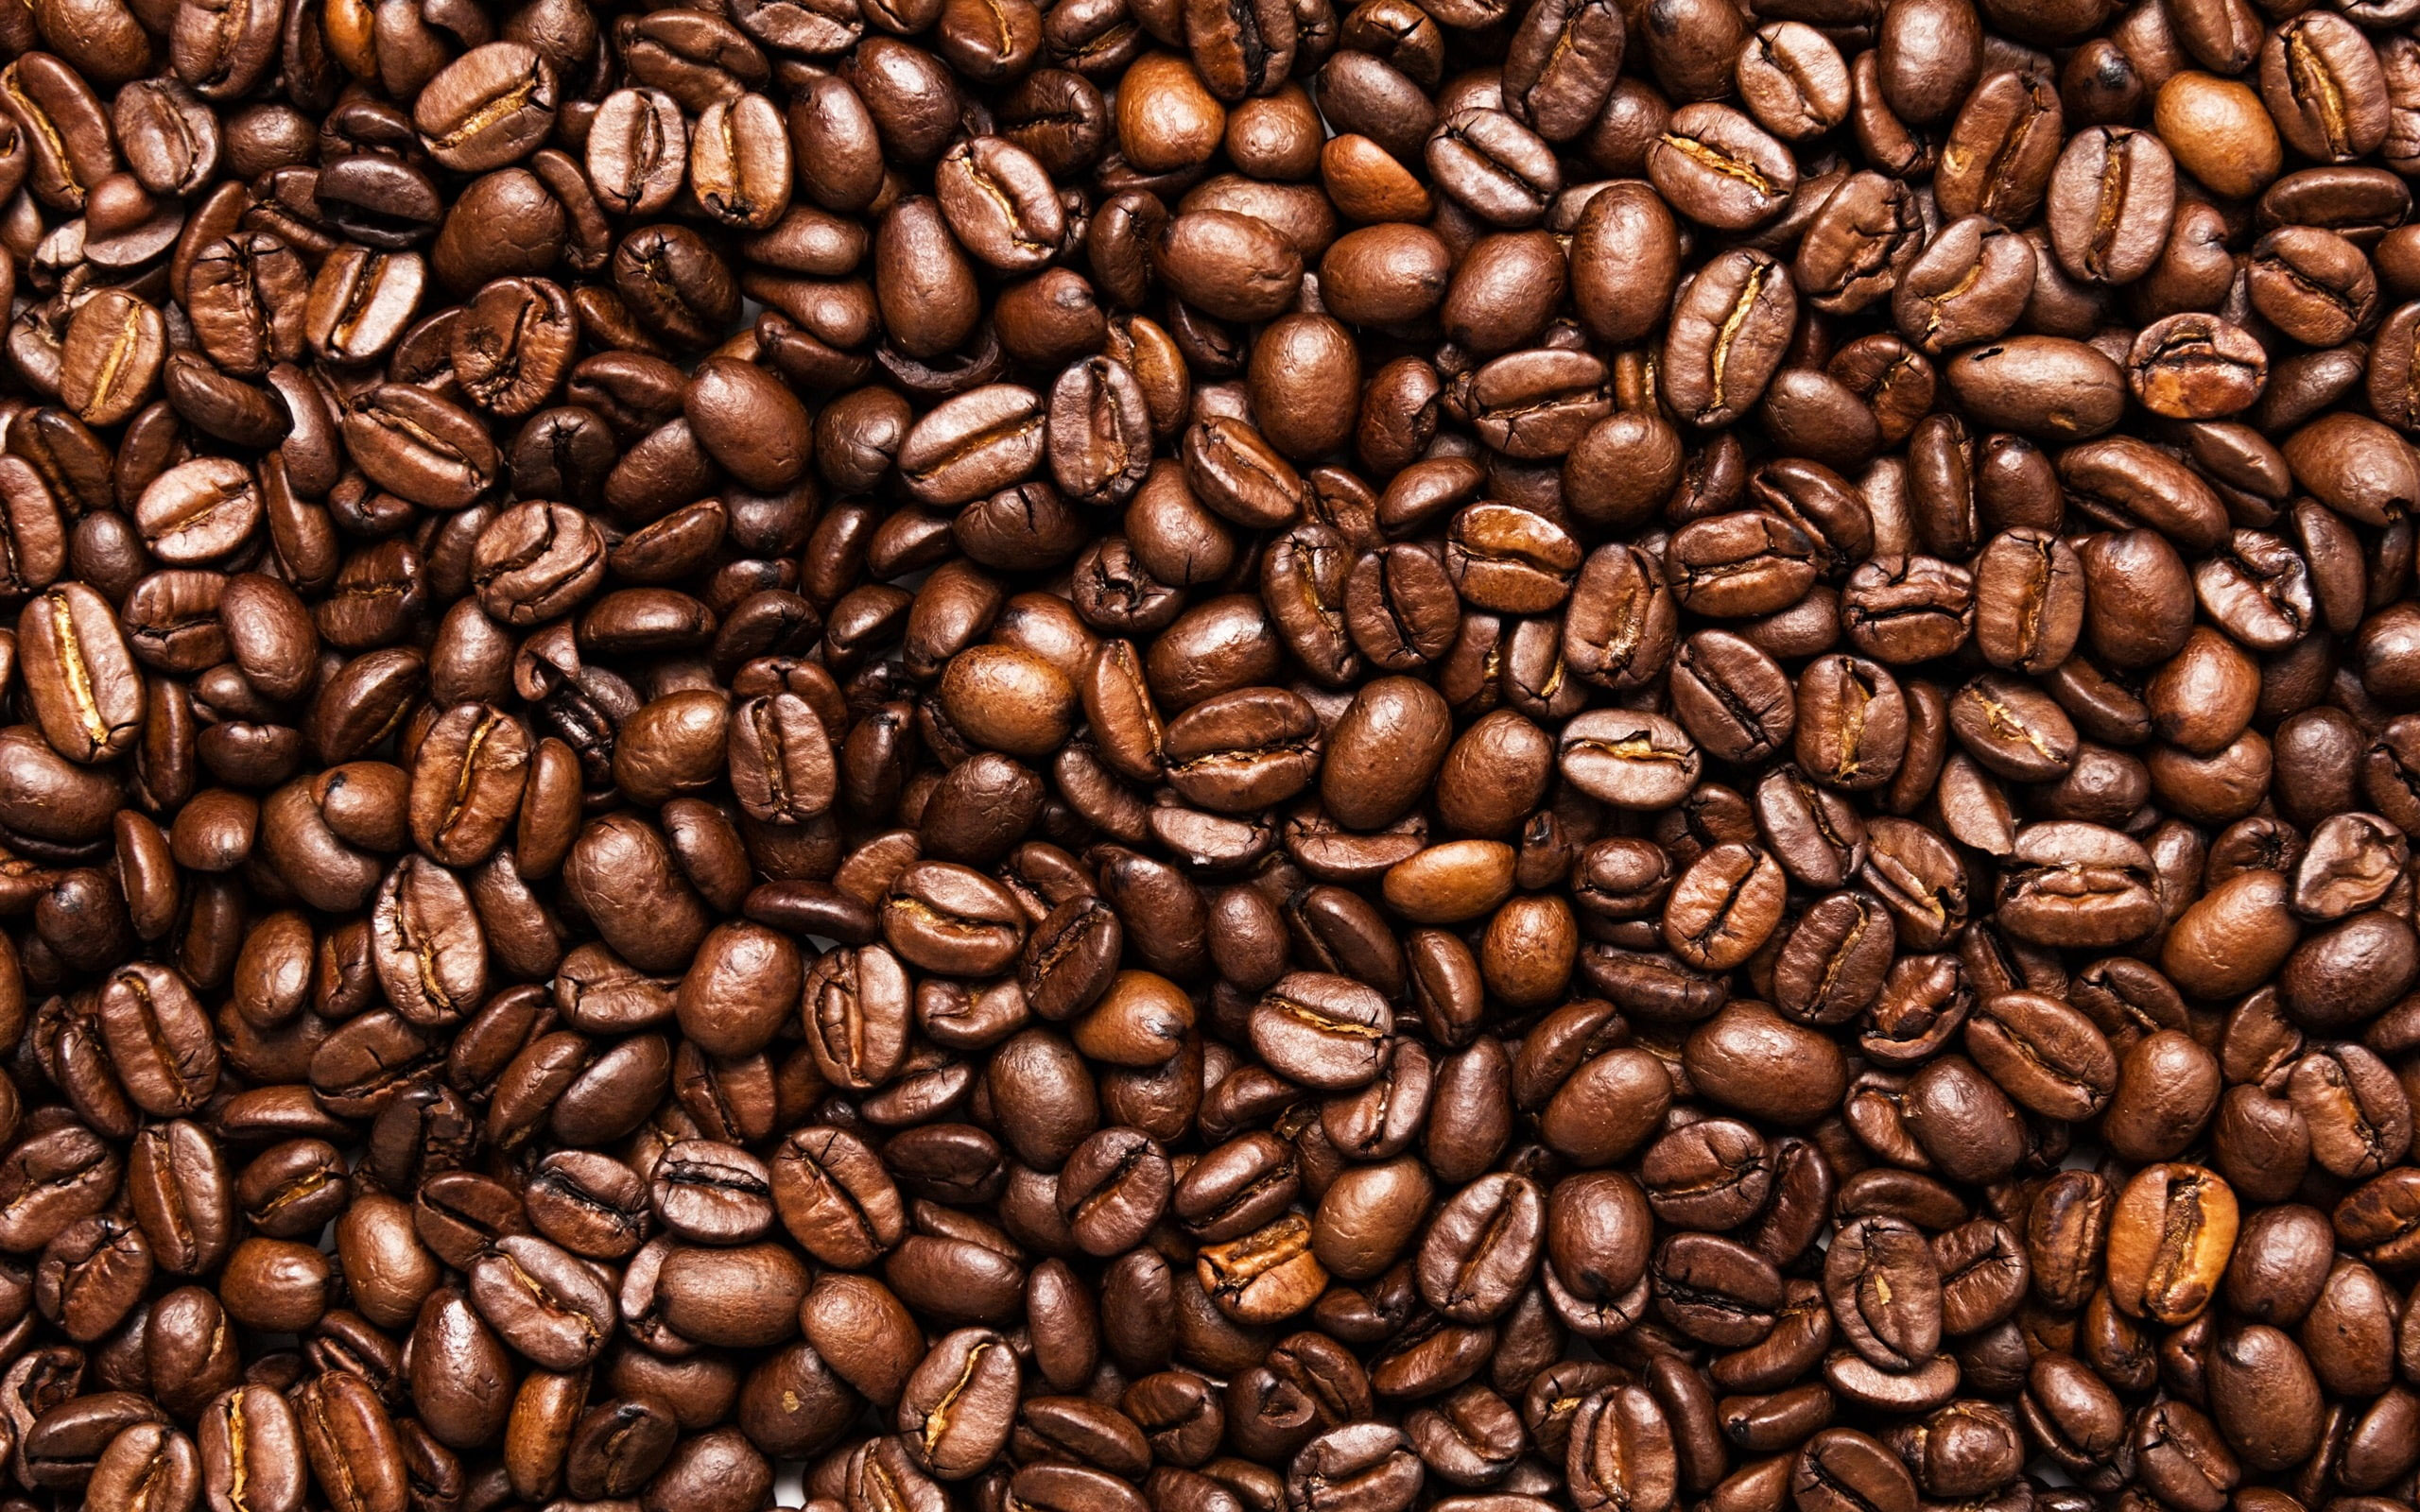 Toasted coffee beans wallpaper, seeds, coffee beans